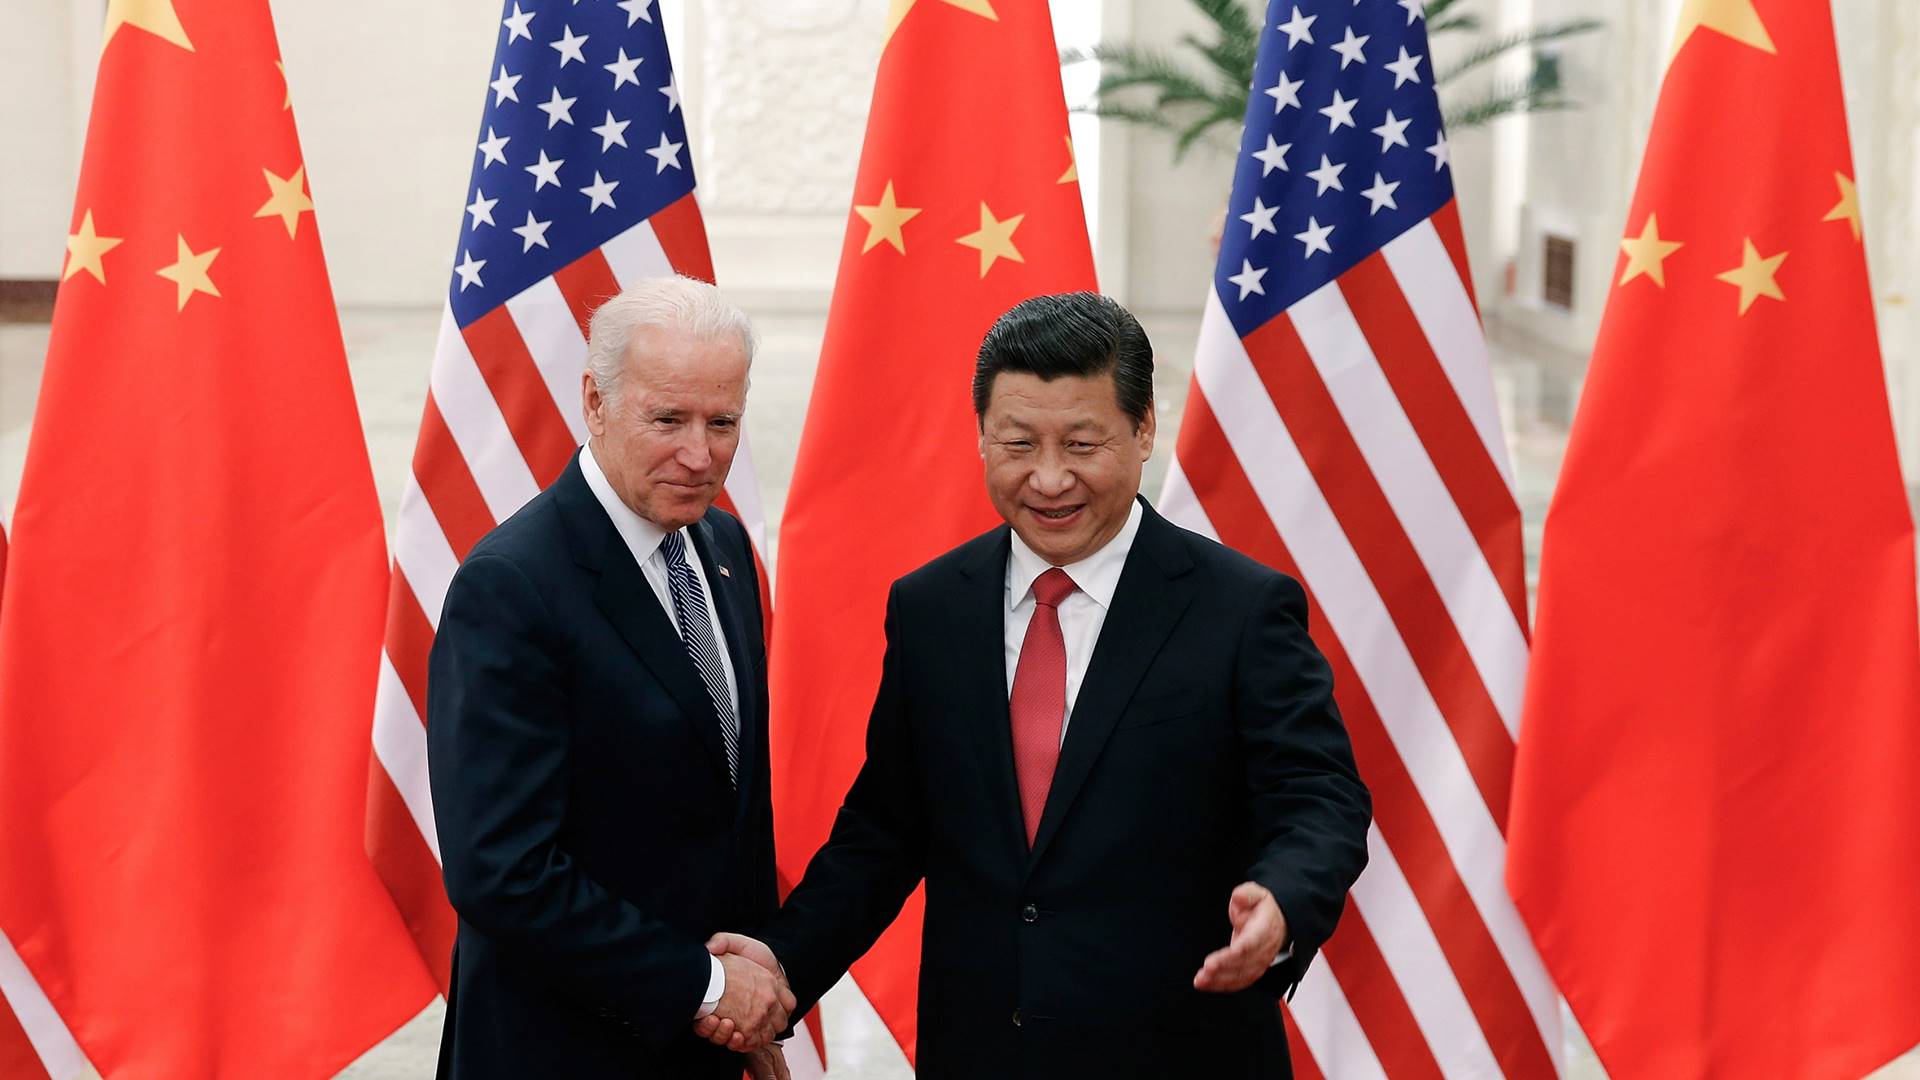 Biden and Xi are offering dueling worldviews — the winner will shape the global future